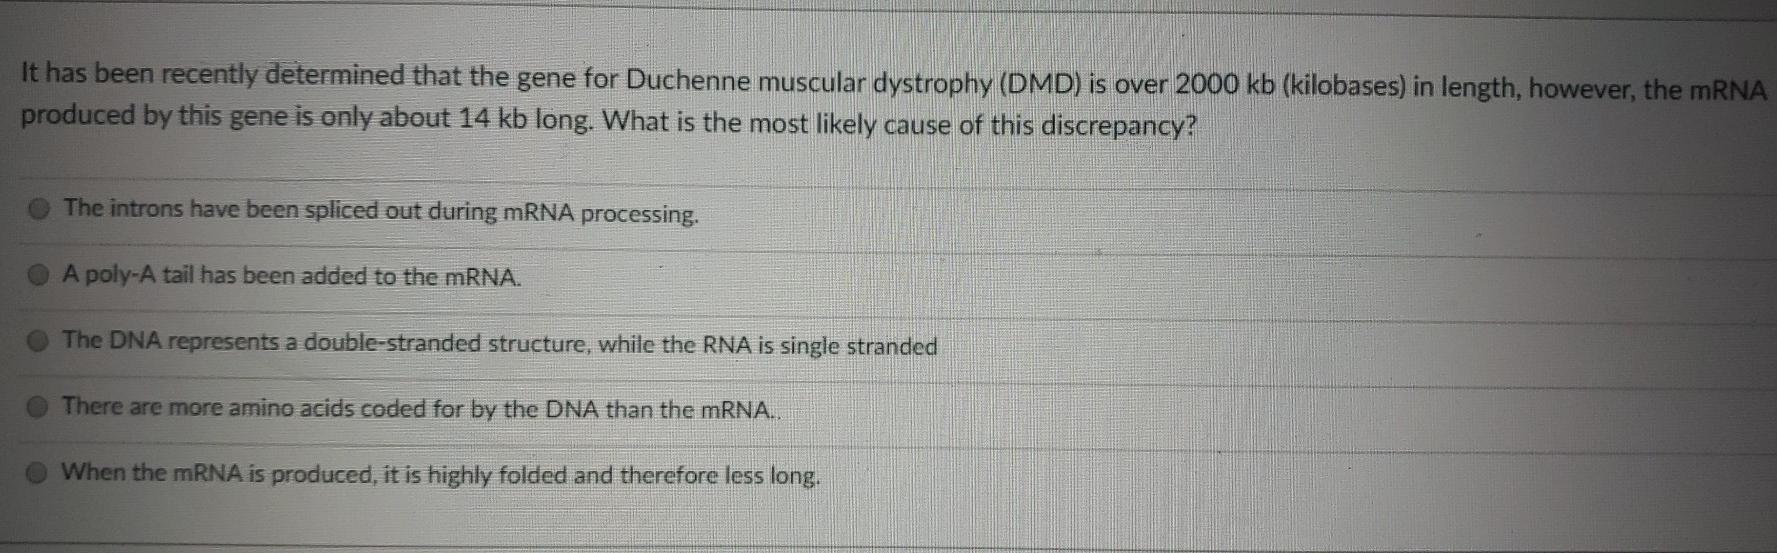 It has been recently determined that the gene for Duchenne muscular dystrophy (DMD) is over 2000 kb (kilobases) in length, ho